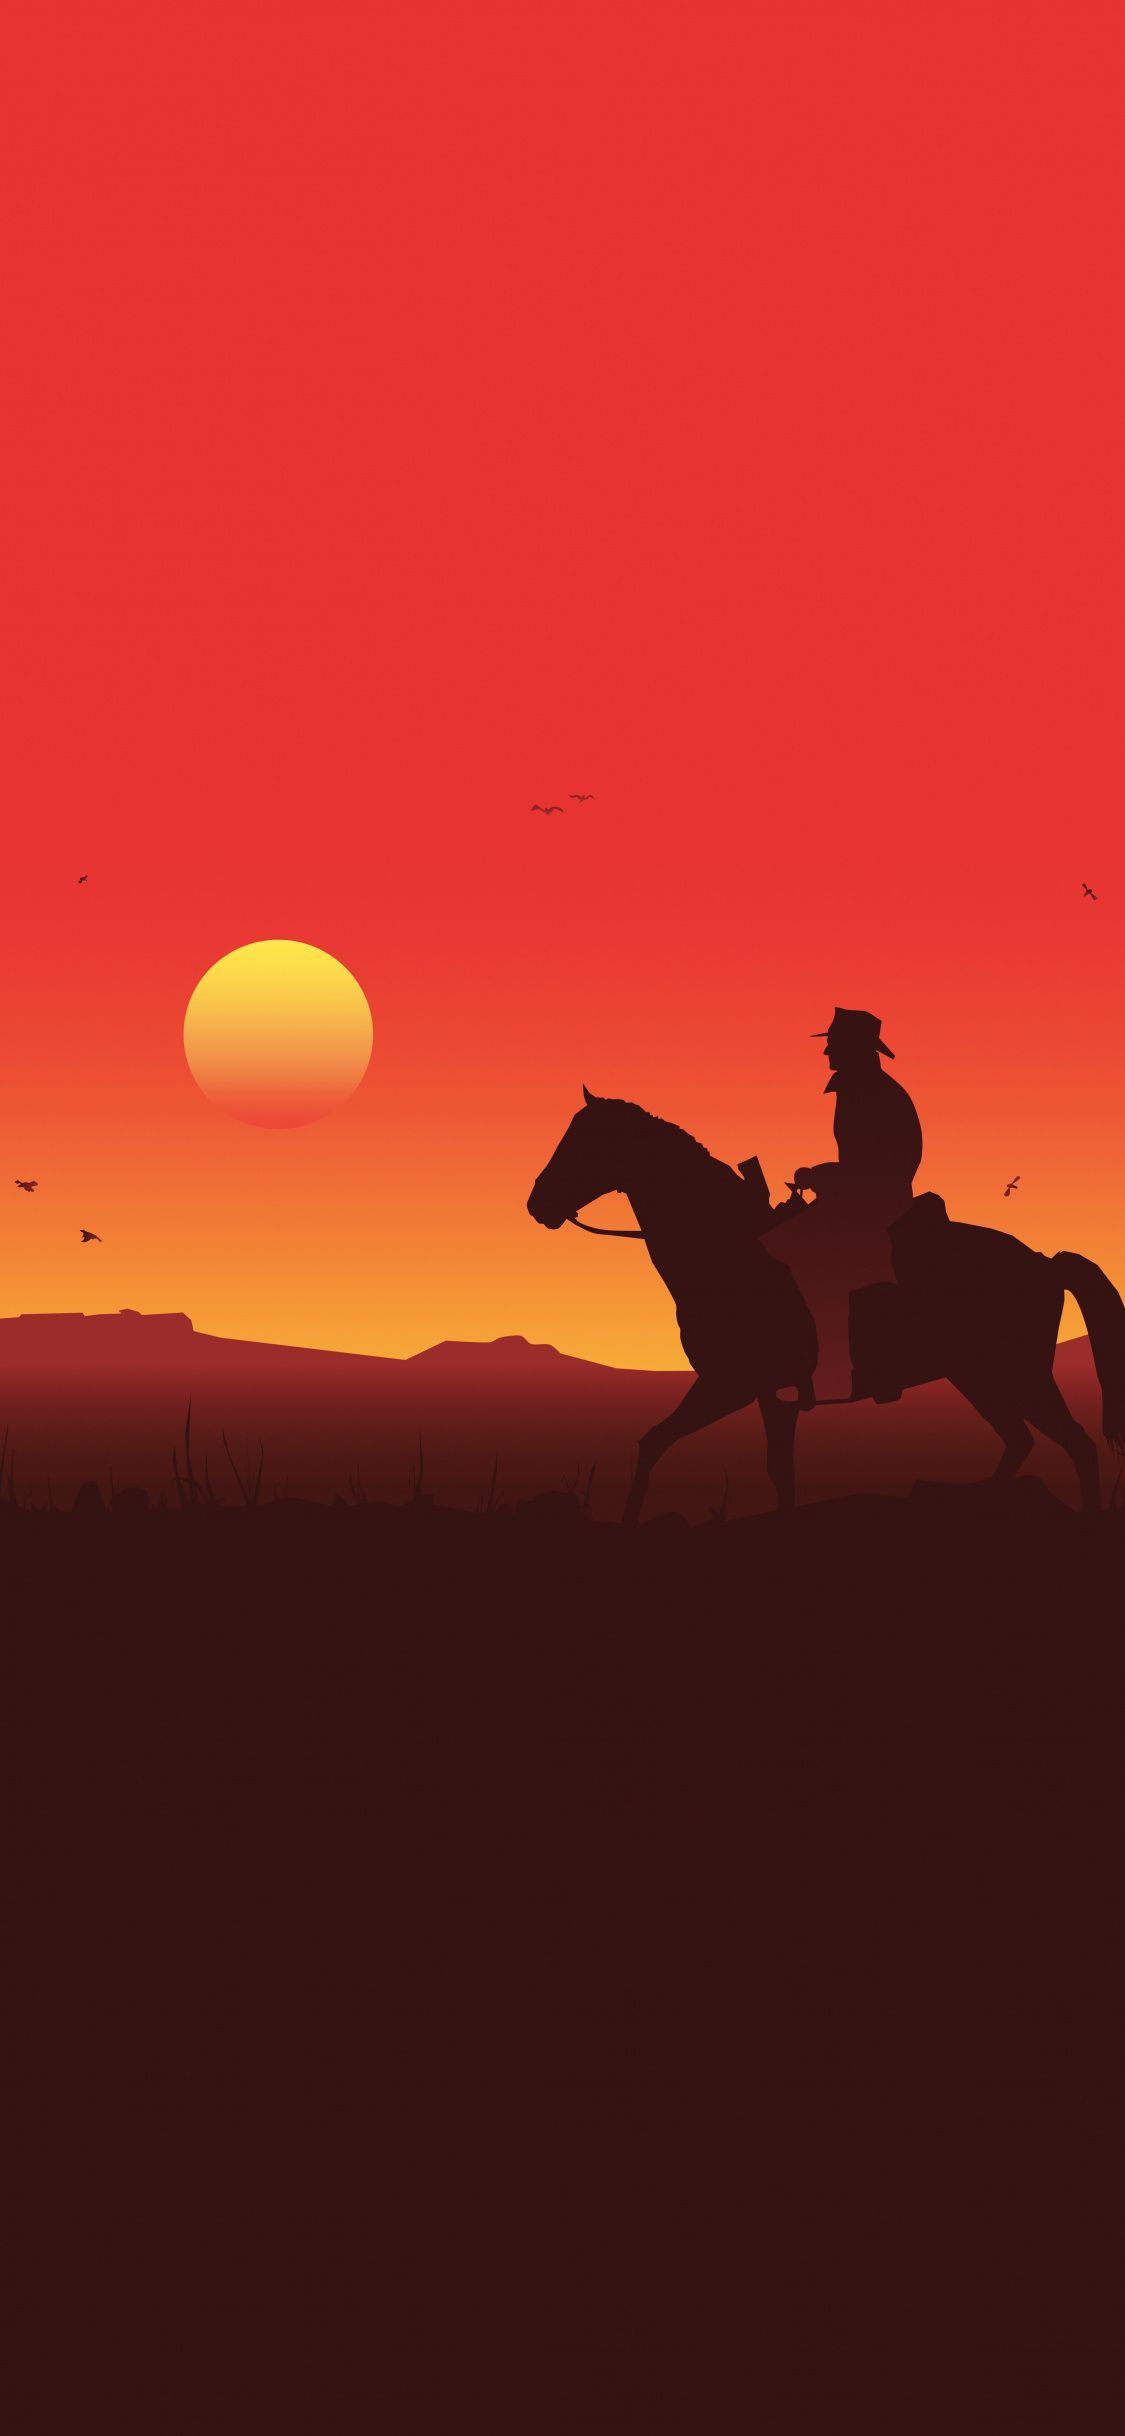 Red Dead Redemption 2 Cellphone Wallpapers - Wallpaper Cave